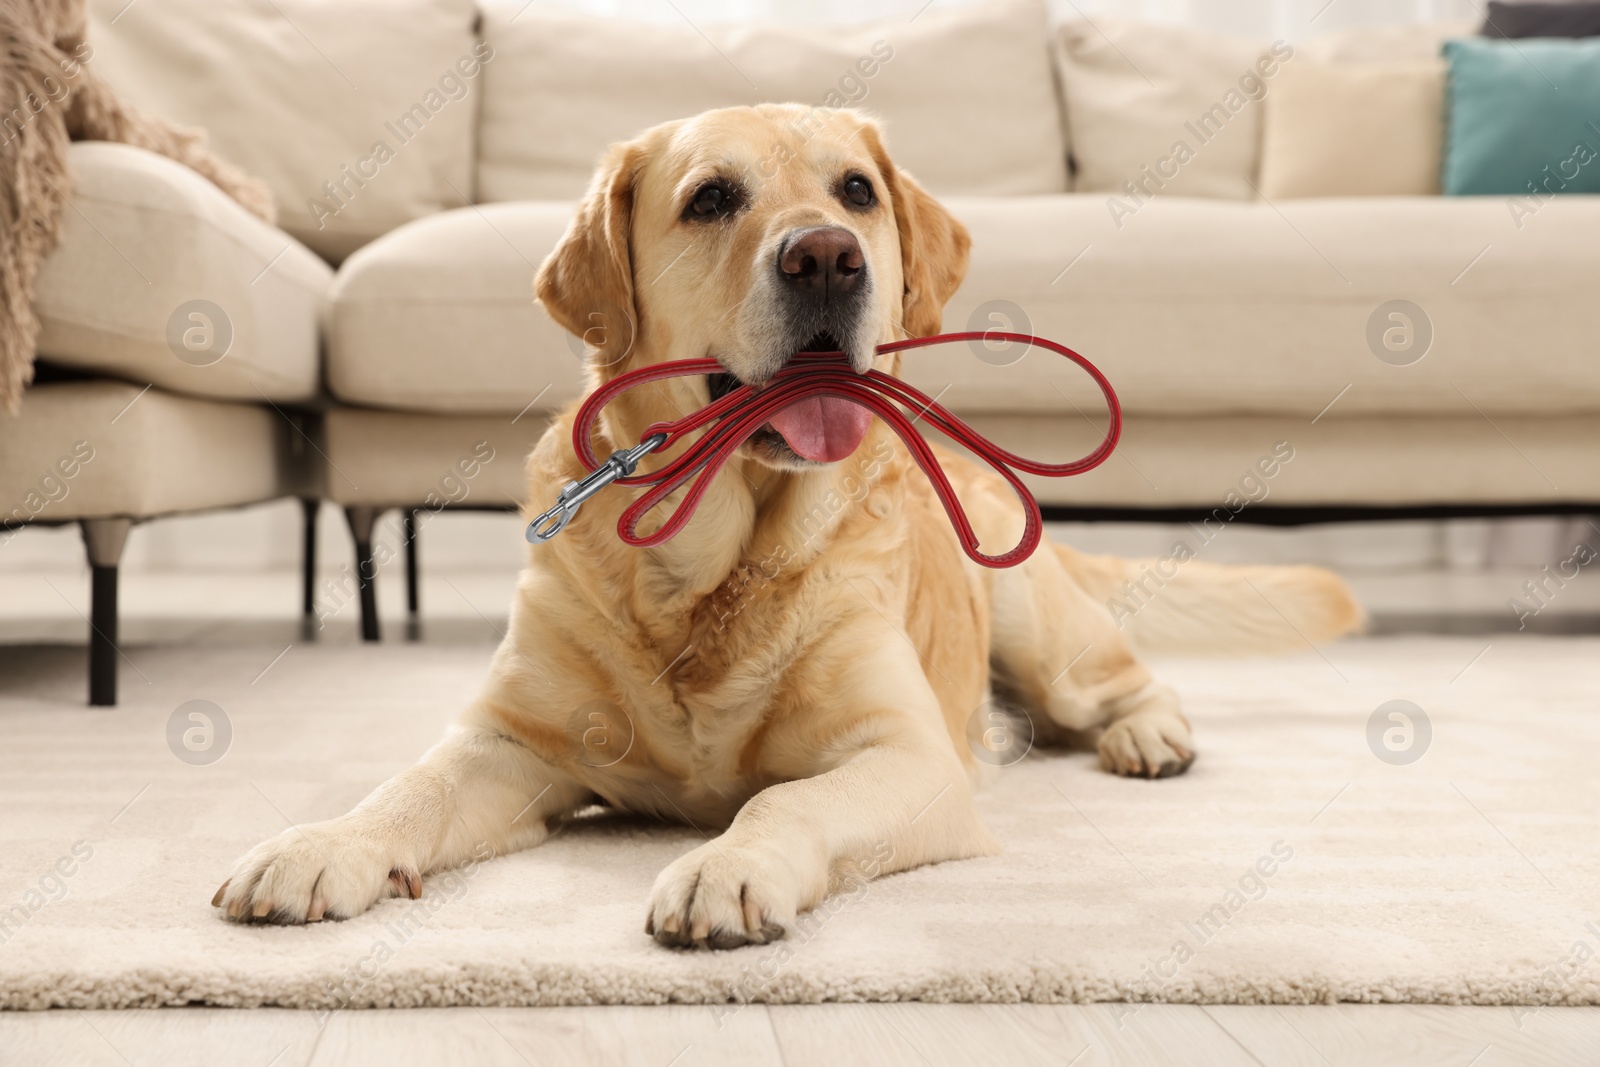 Image of Adorable Labrador Retriever dog holding leash in mouth indoors